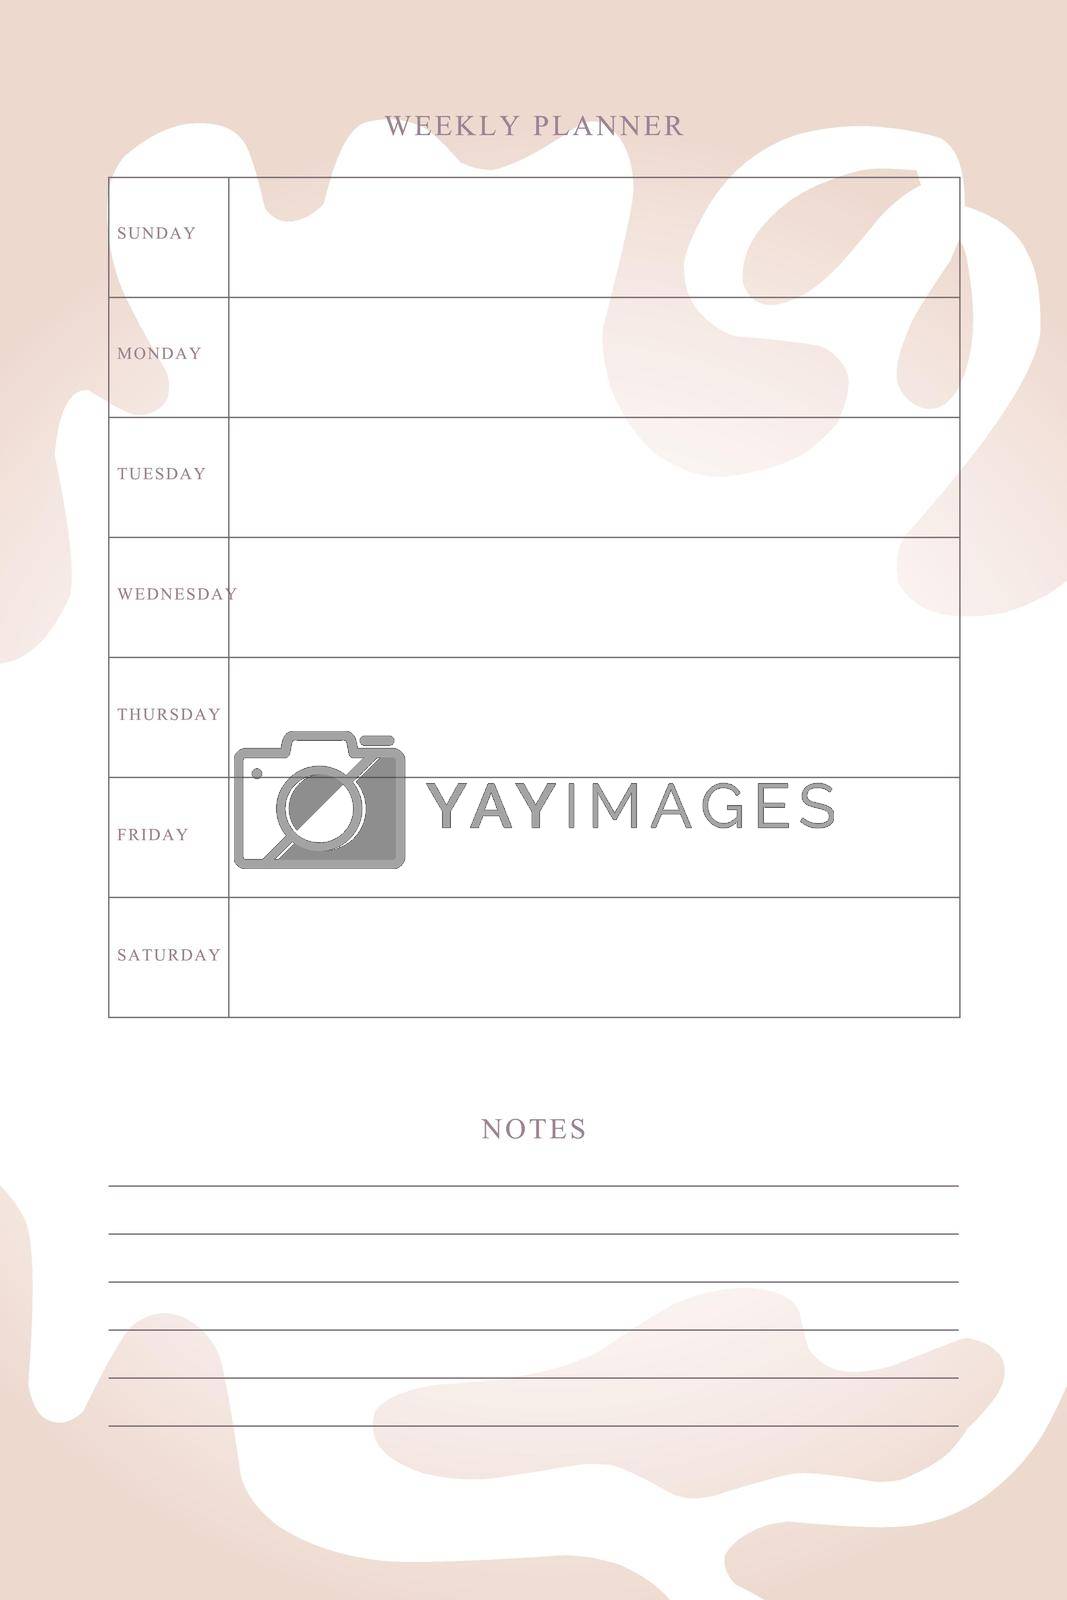 Royalty free image of planner daily weekly monthly organizer to do list with cute colorful design by MariaTem